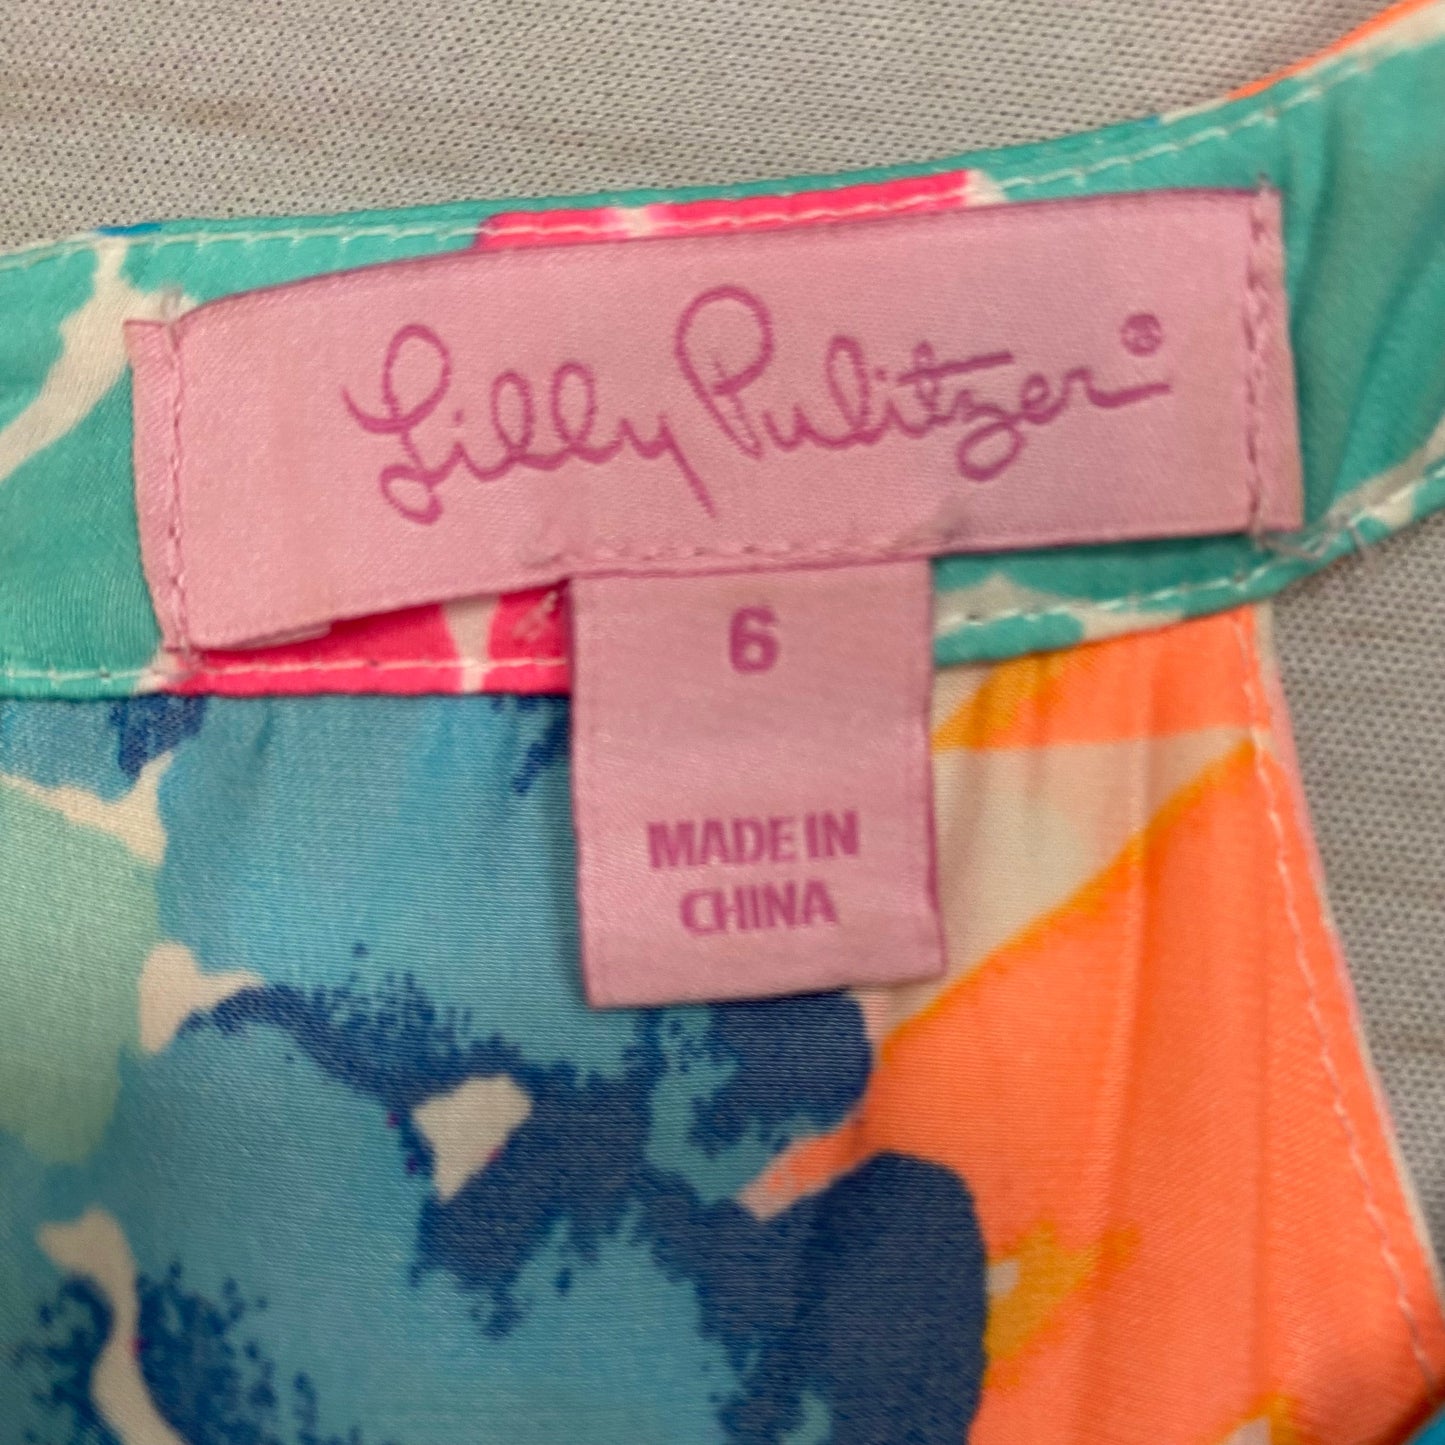 Romper Designer By Lilly Pulitzer  Size: S